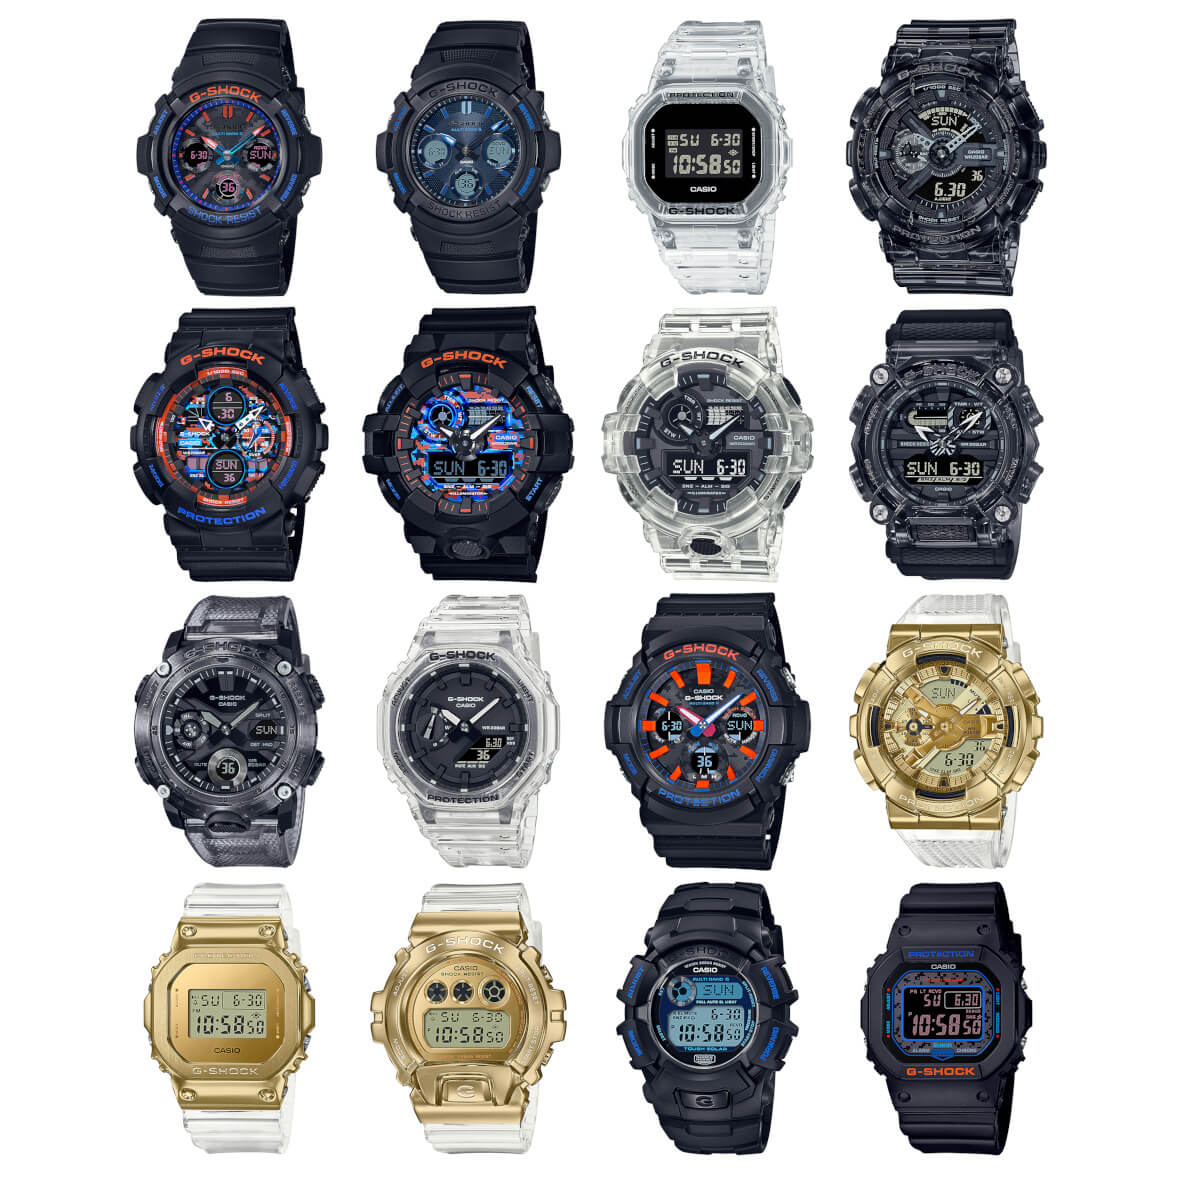 G-Shock February 2021 New Releases